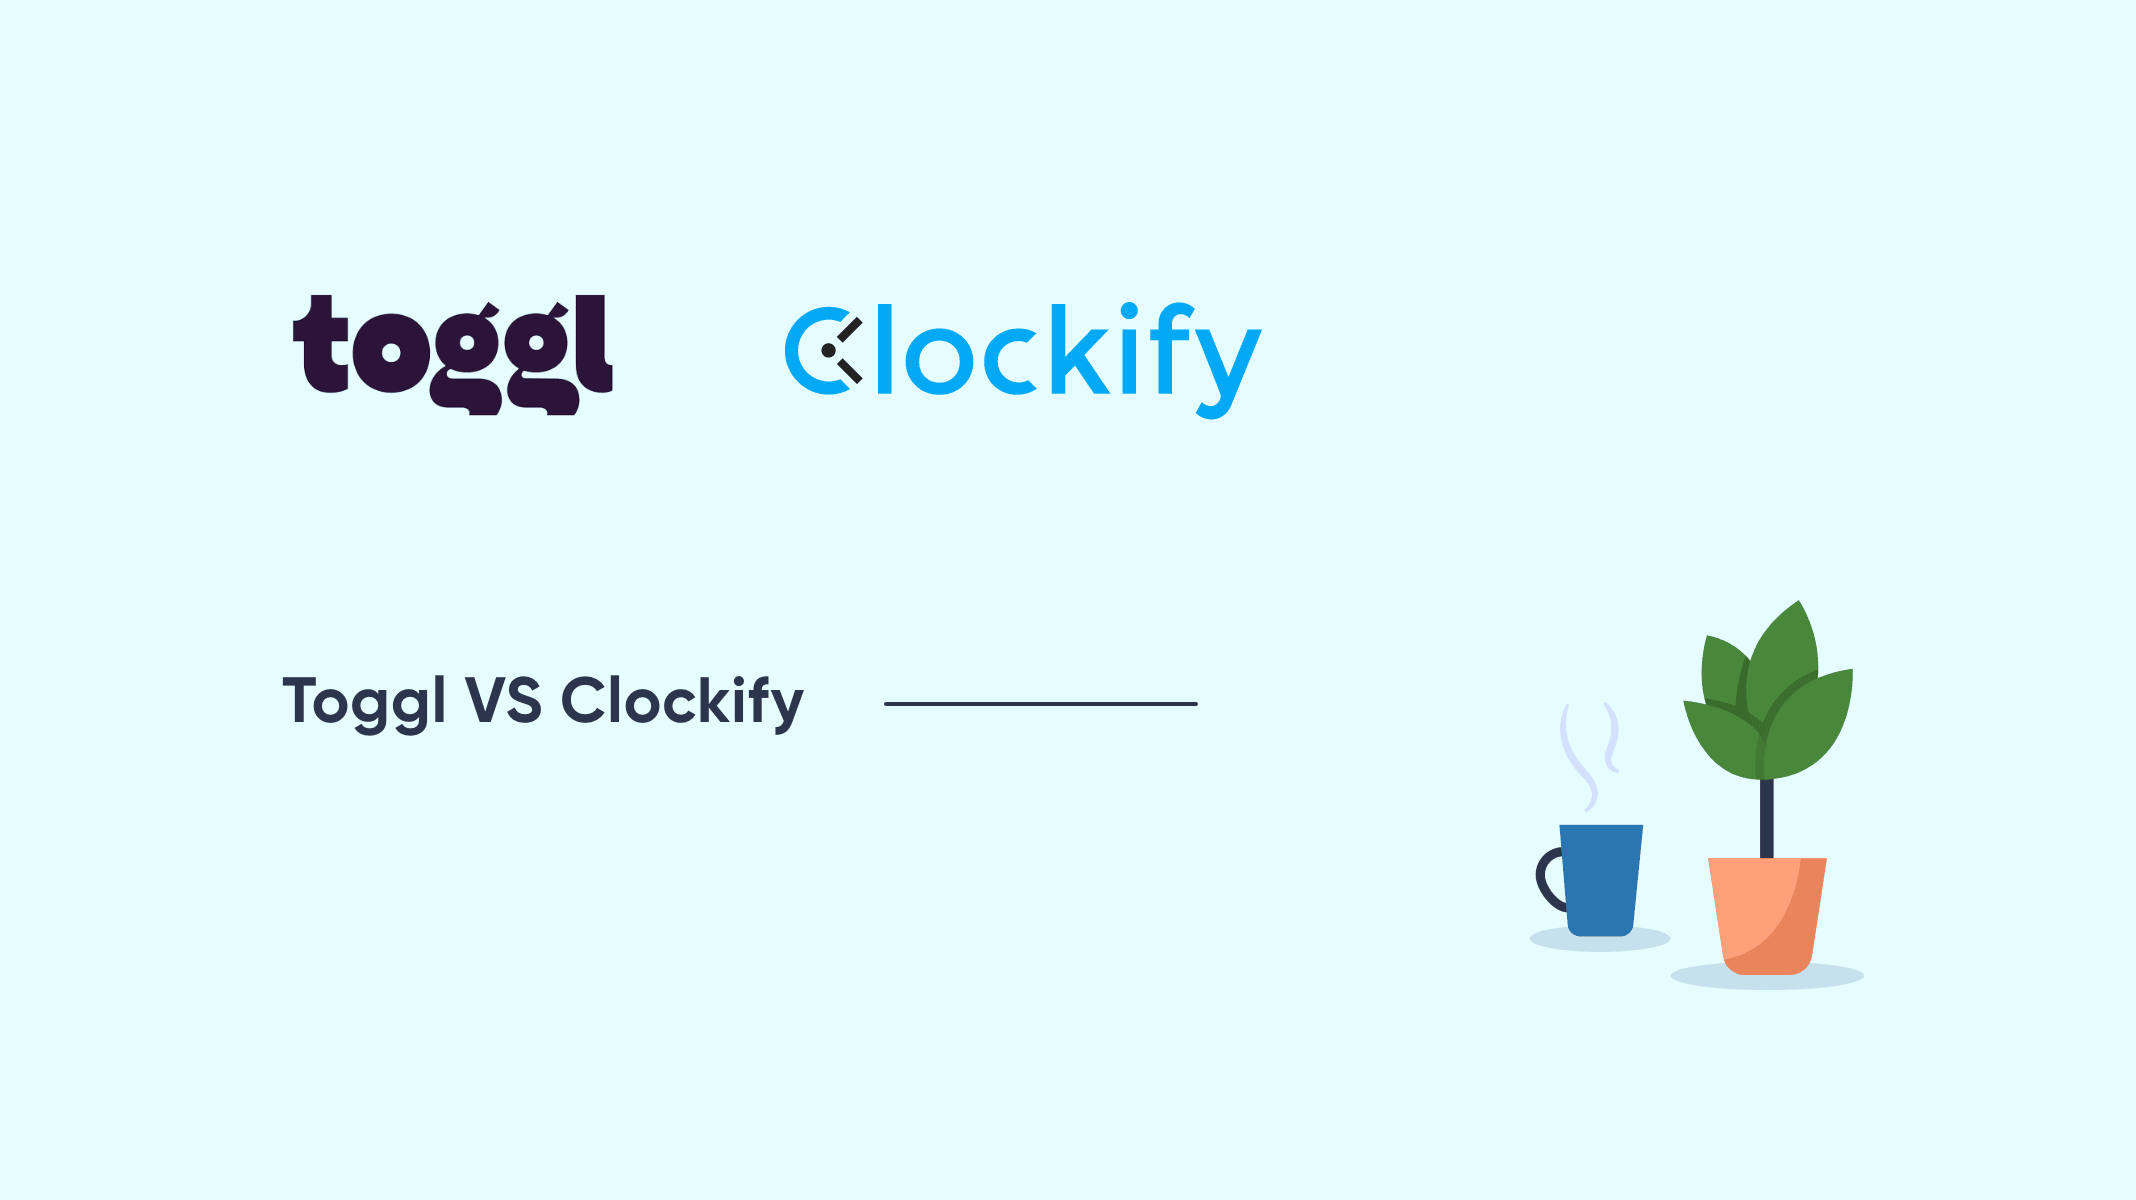 Toggl and Clockify logo being shown, with Toggl VS Clockify written alongside a dashed line and coffee and a tree